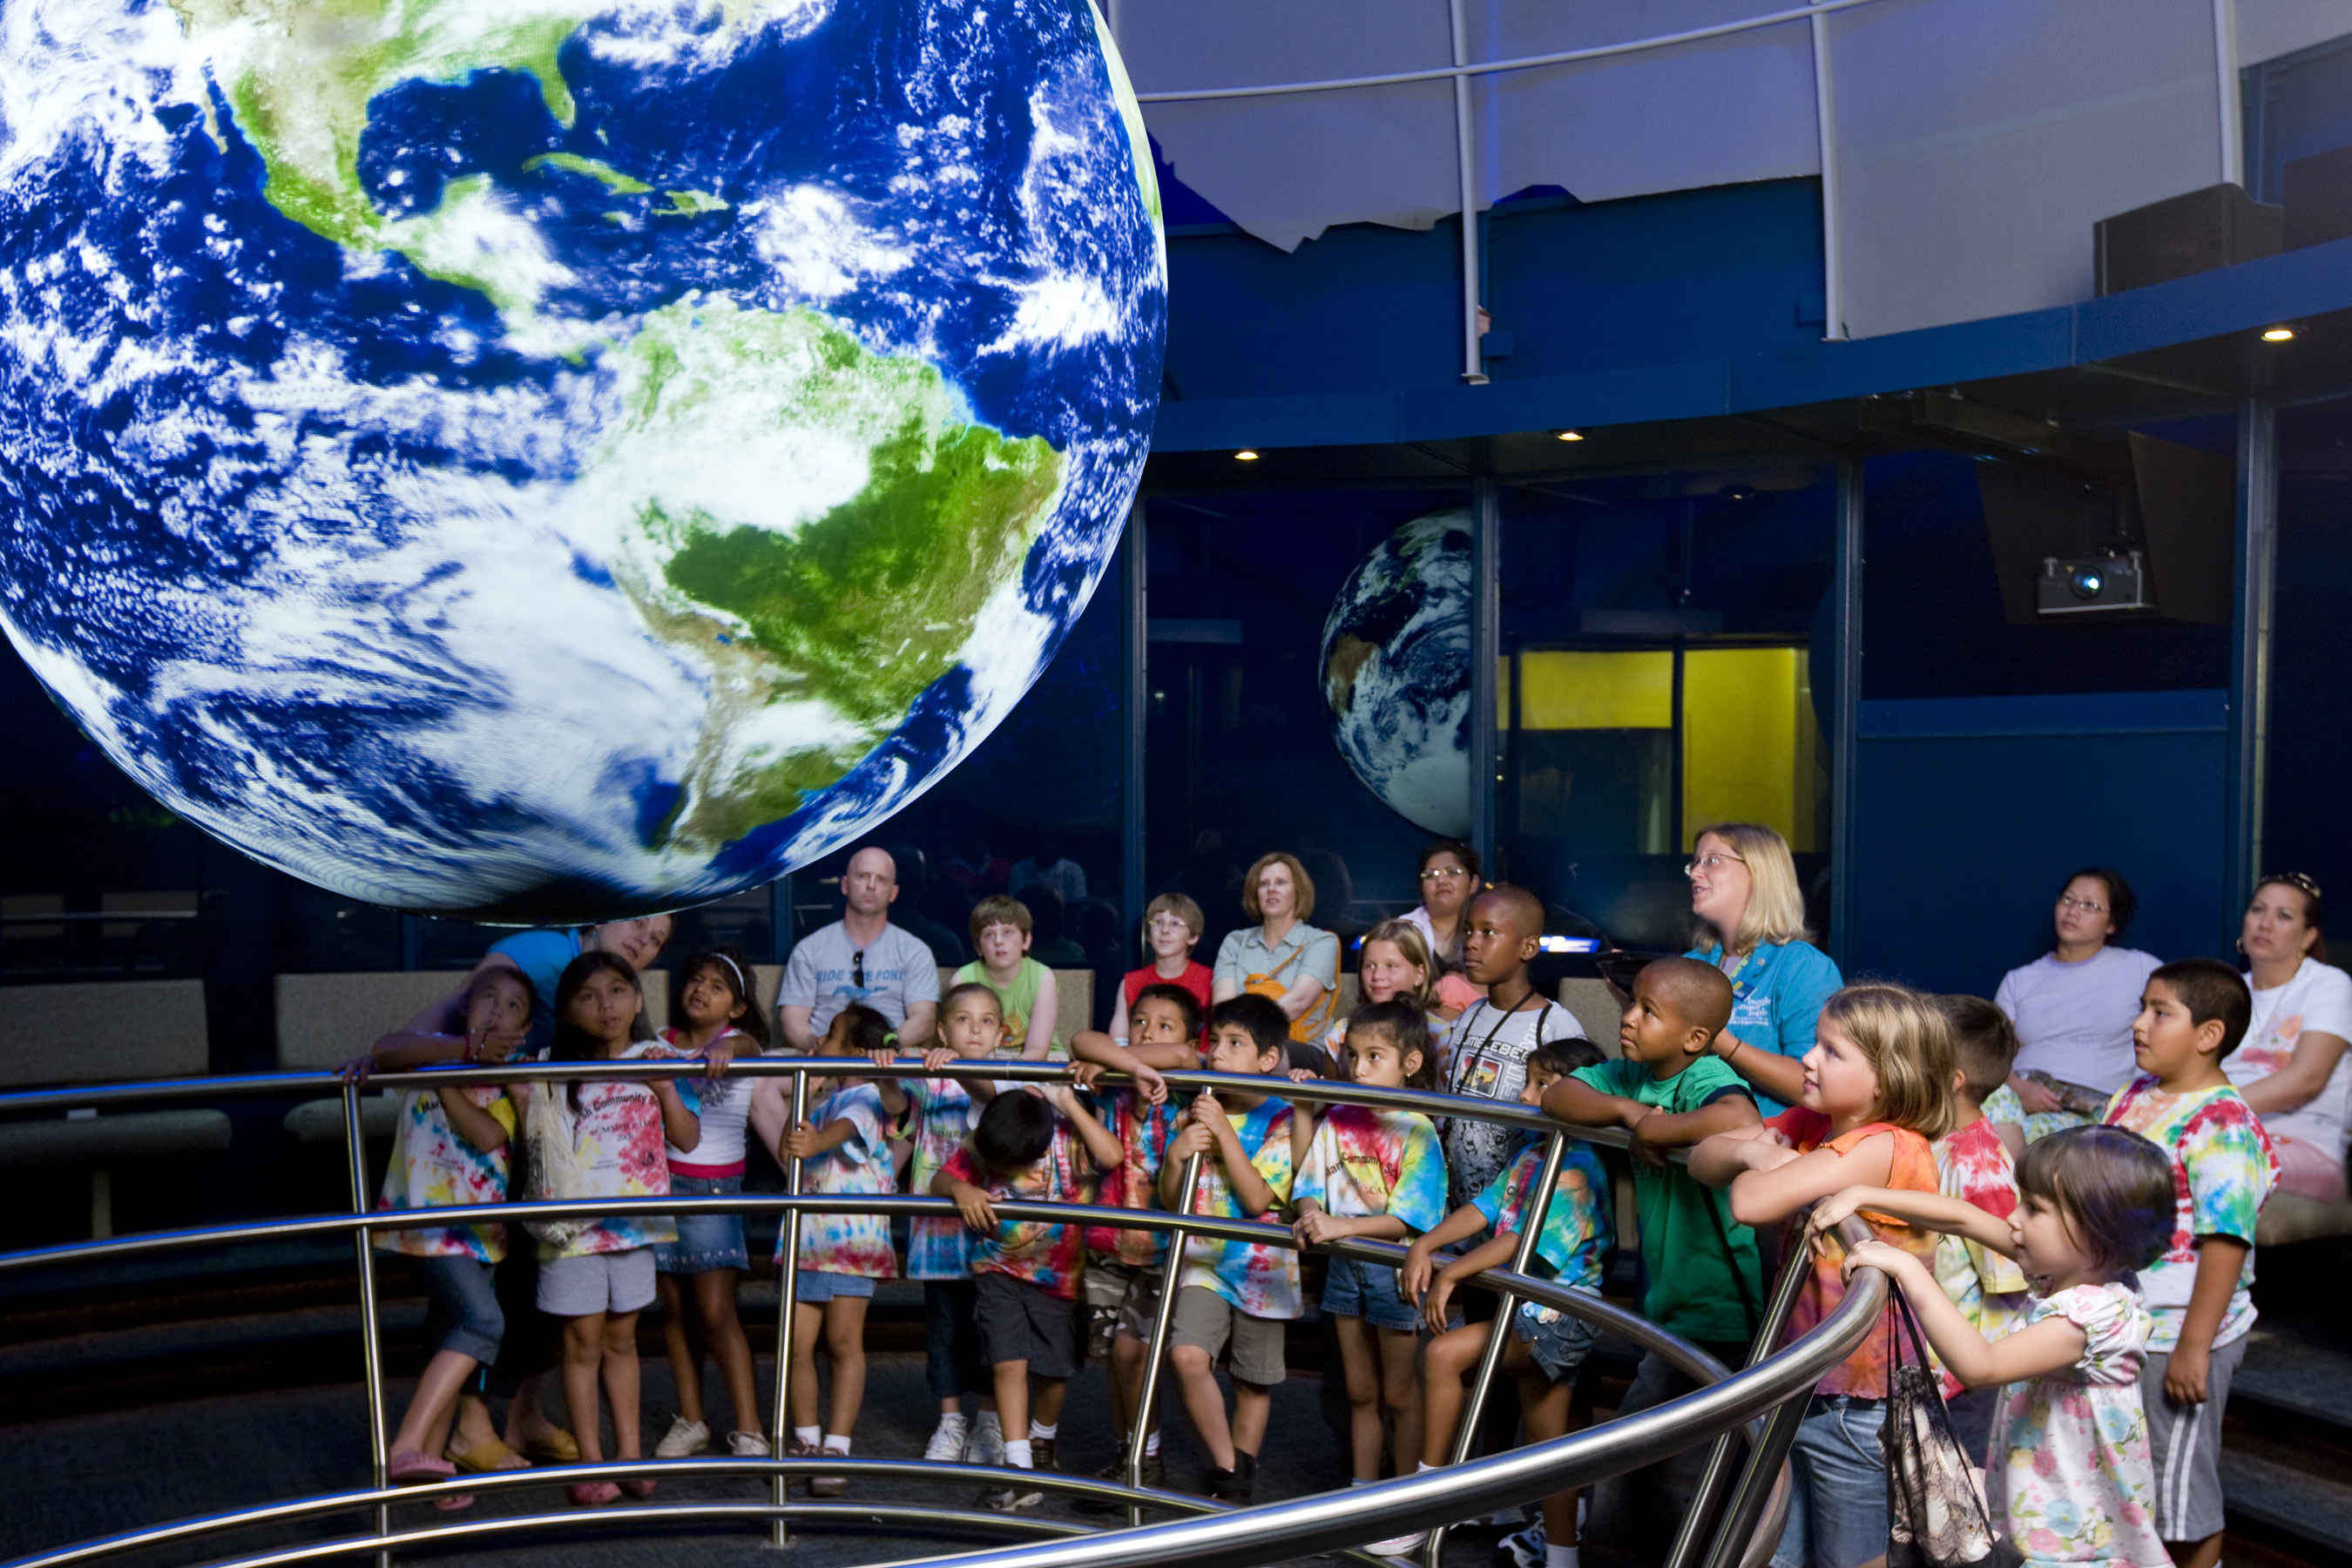 Schoolchildren crowd around the railing surrounding Science On a Sphere during a presentation